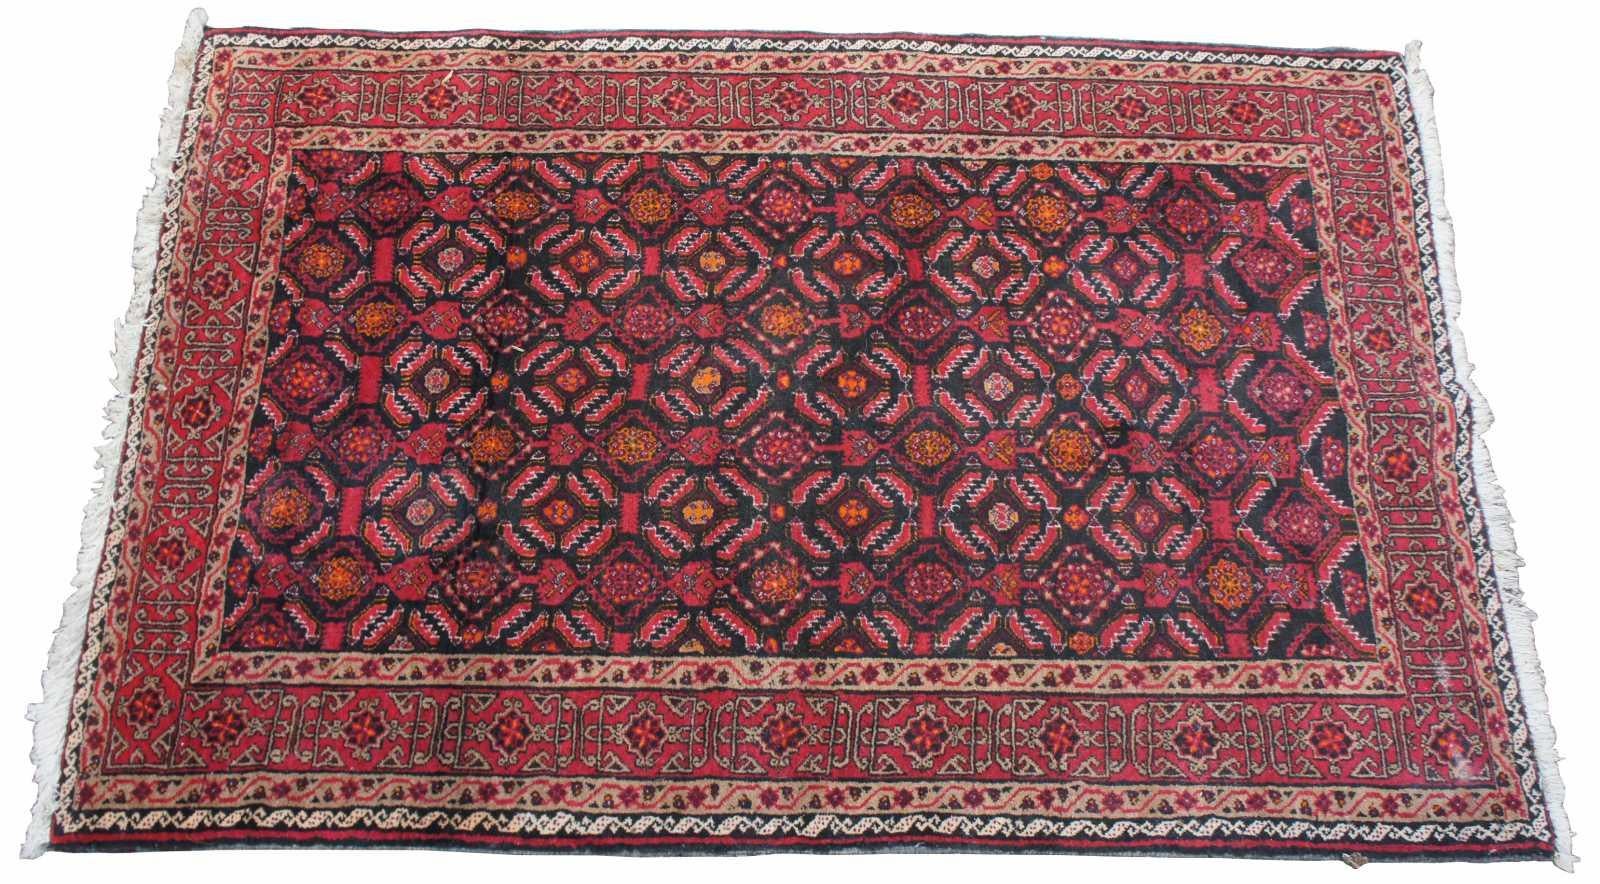 Baluchi also spelled Baloochi or Balochi, floor covering woven by the Baloch people living in Afghanistan and eastern Iran. The patterns in these rugs are highly varied, many consisting of repeated motifs, diagonally arranged across the field. This